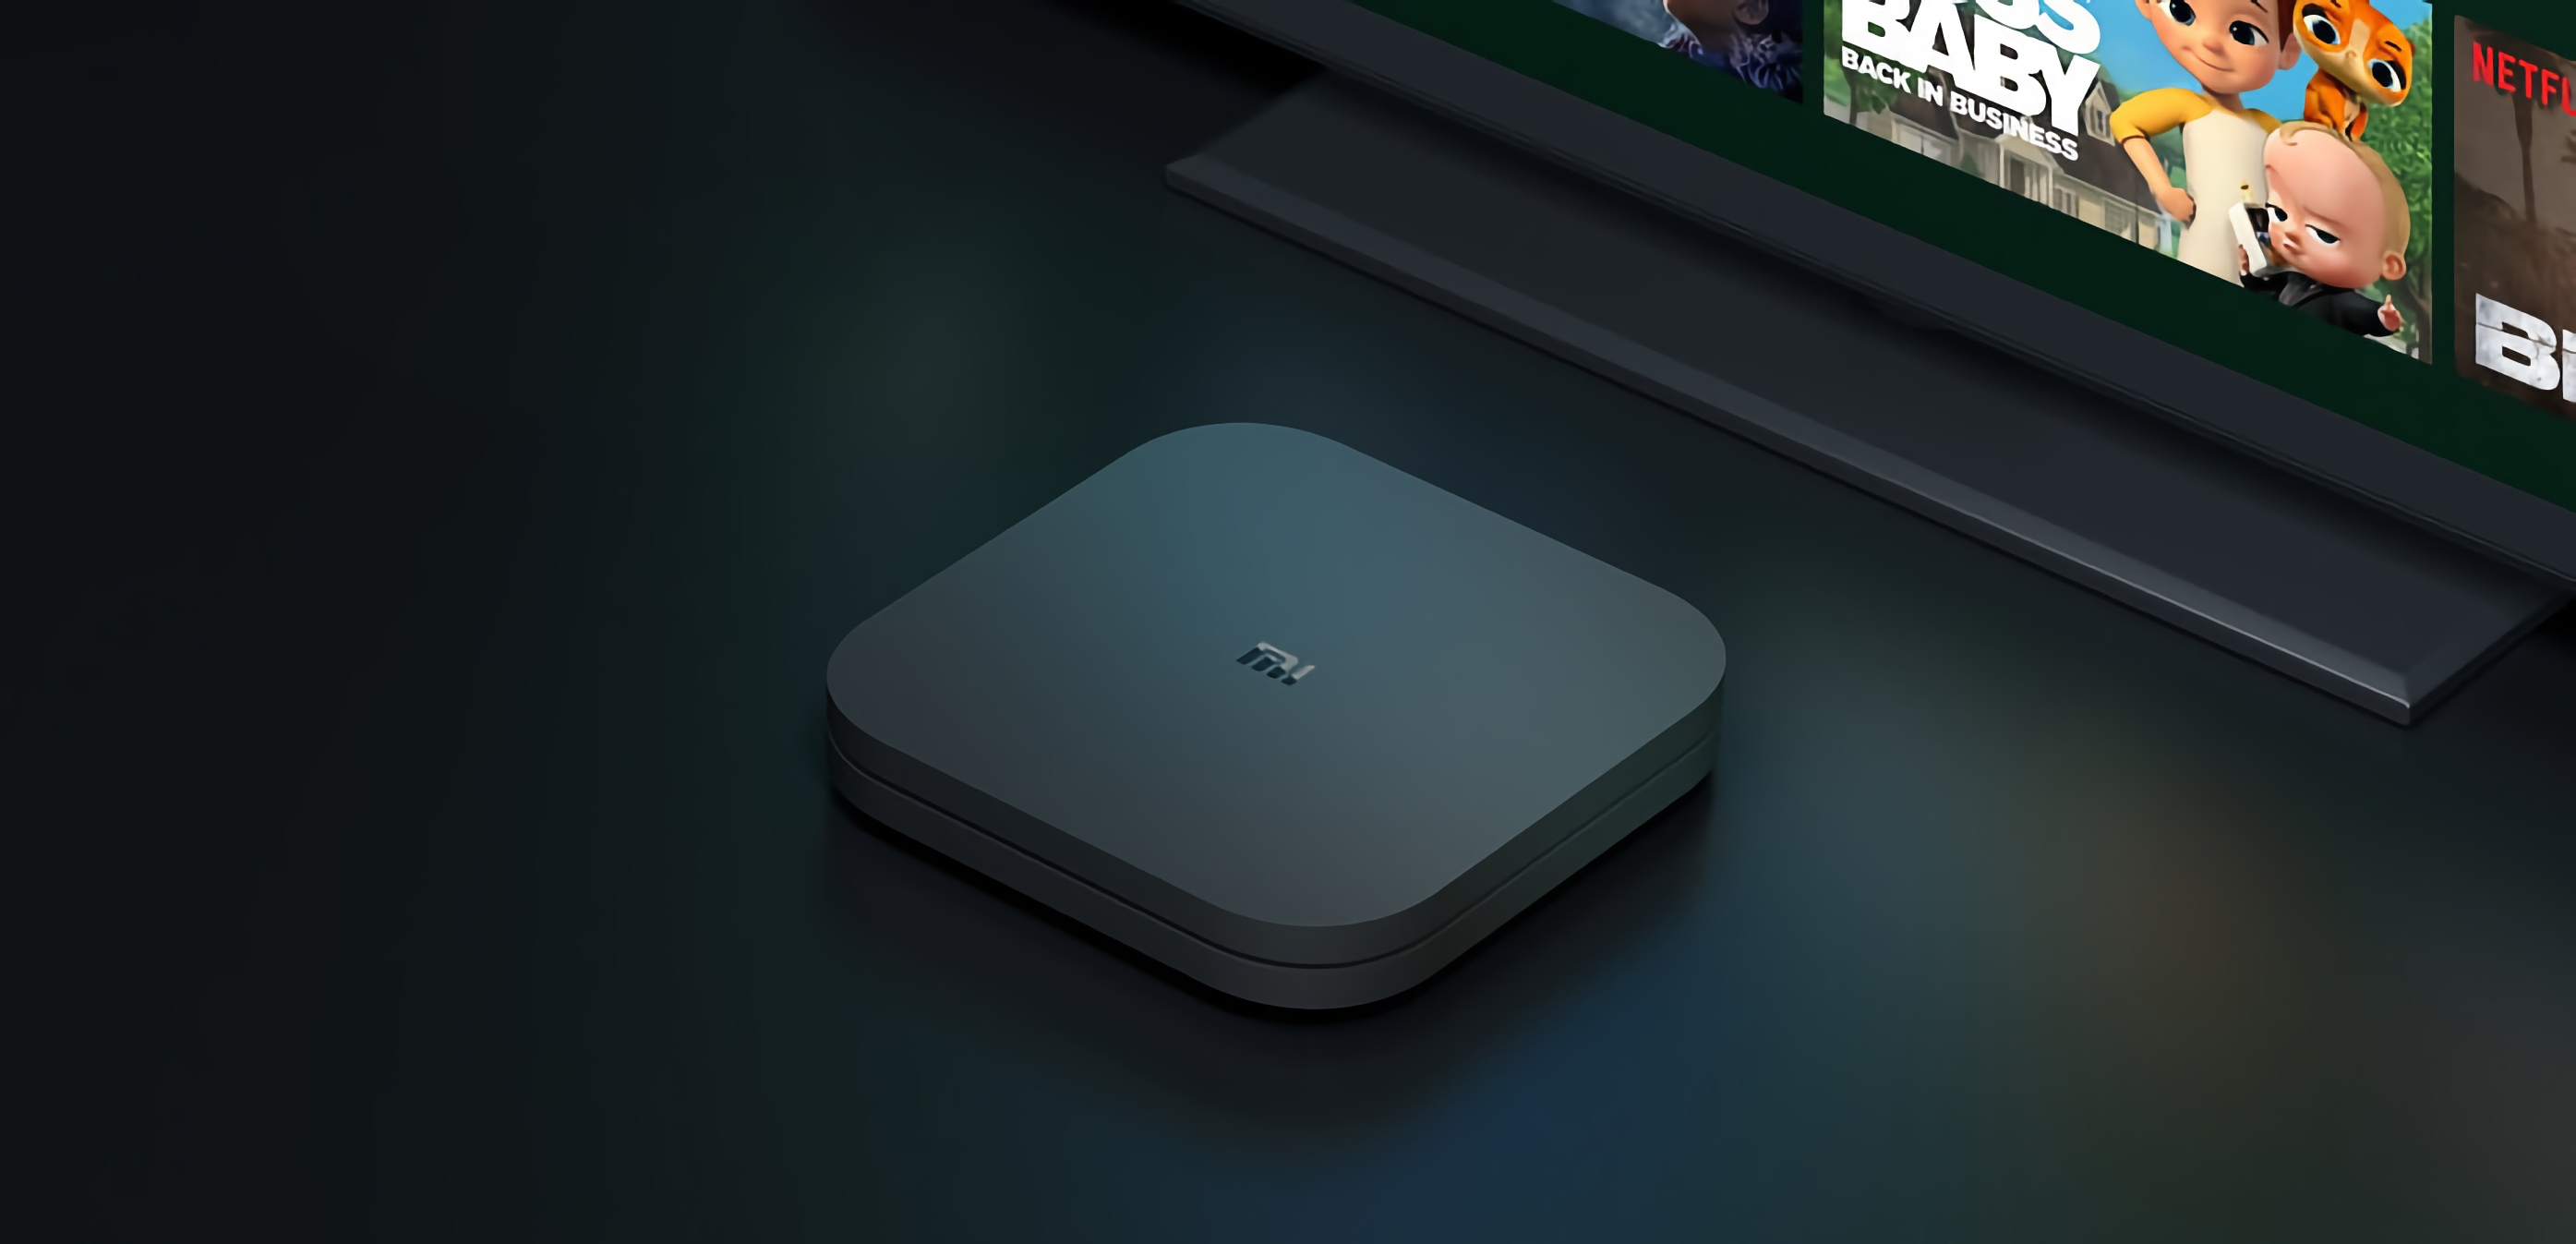 The Xiaomi Mi Box S with 4K, Chromecast and Android on board can be purchased now on AliExpress for $54 gagadget.com